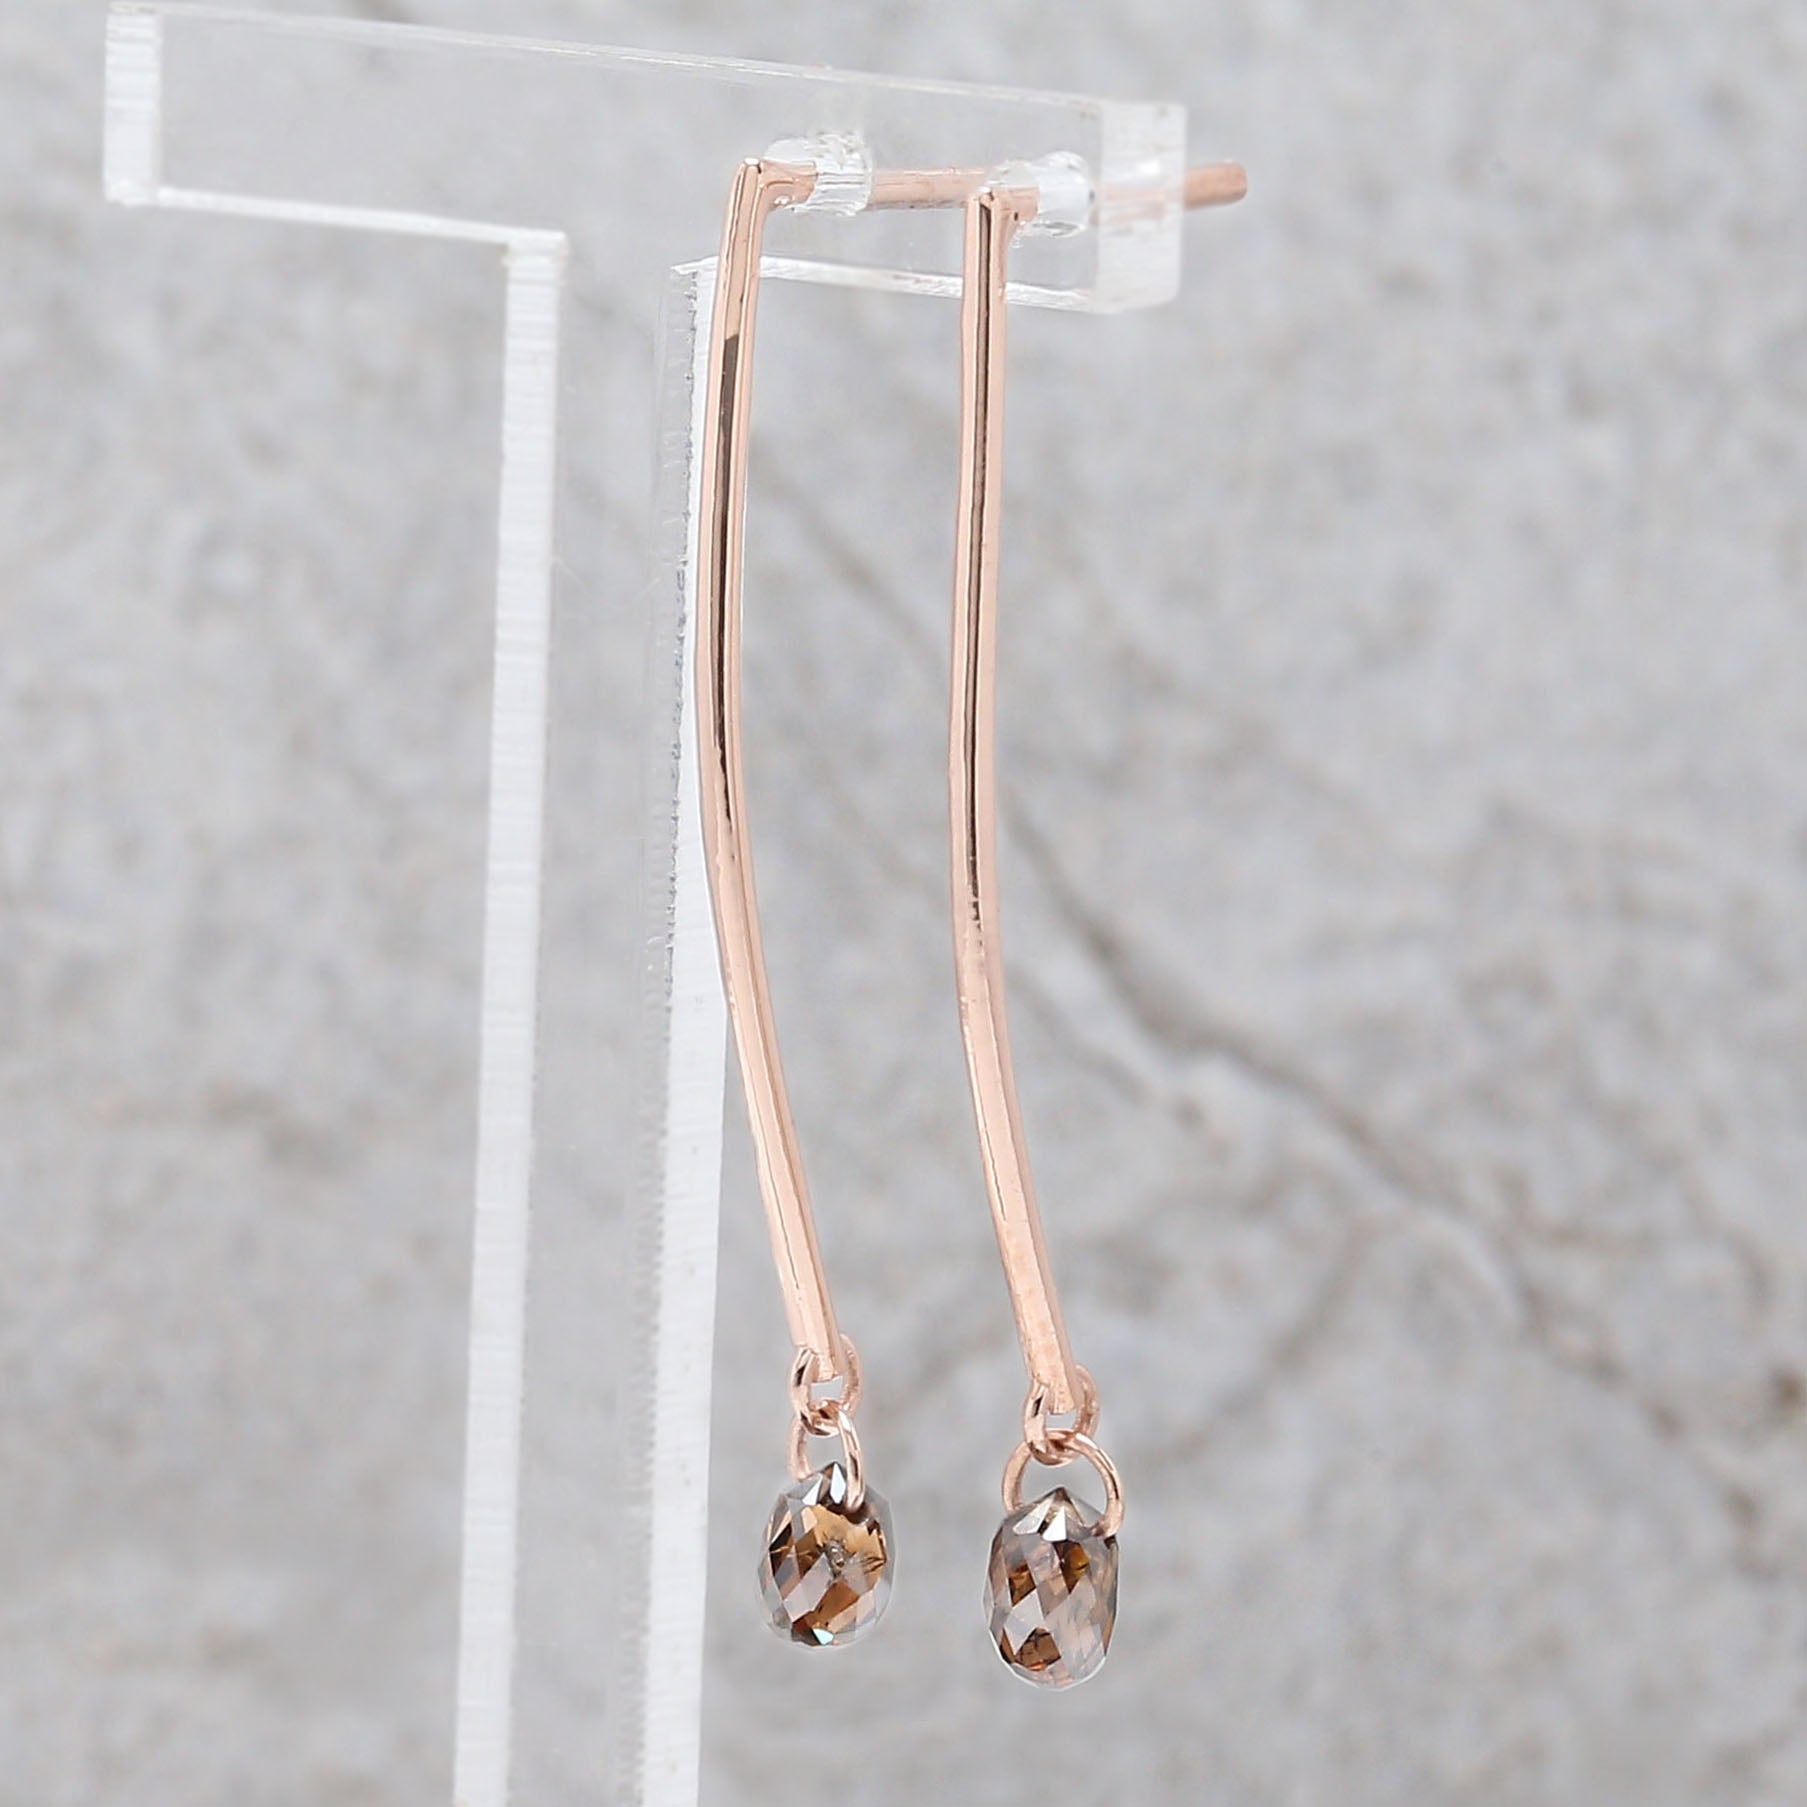 Drop Brown Color Diamond Earring Engagement Wedding Gift Earring 14K Solid Rose White Yellow Gold Earring 0.89 CT KDL9910